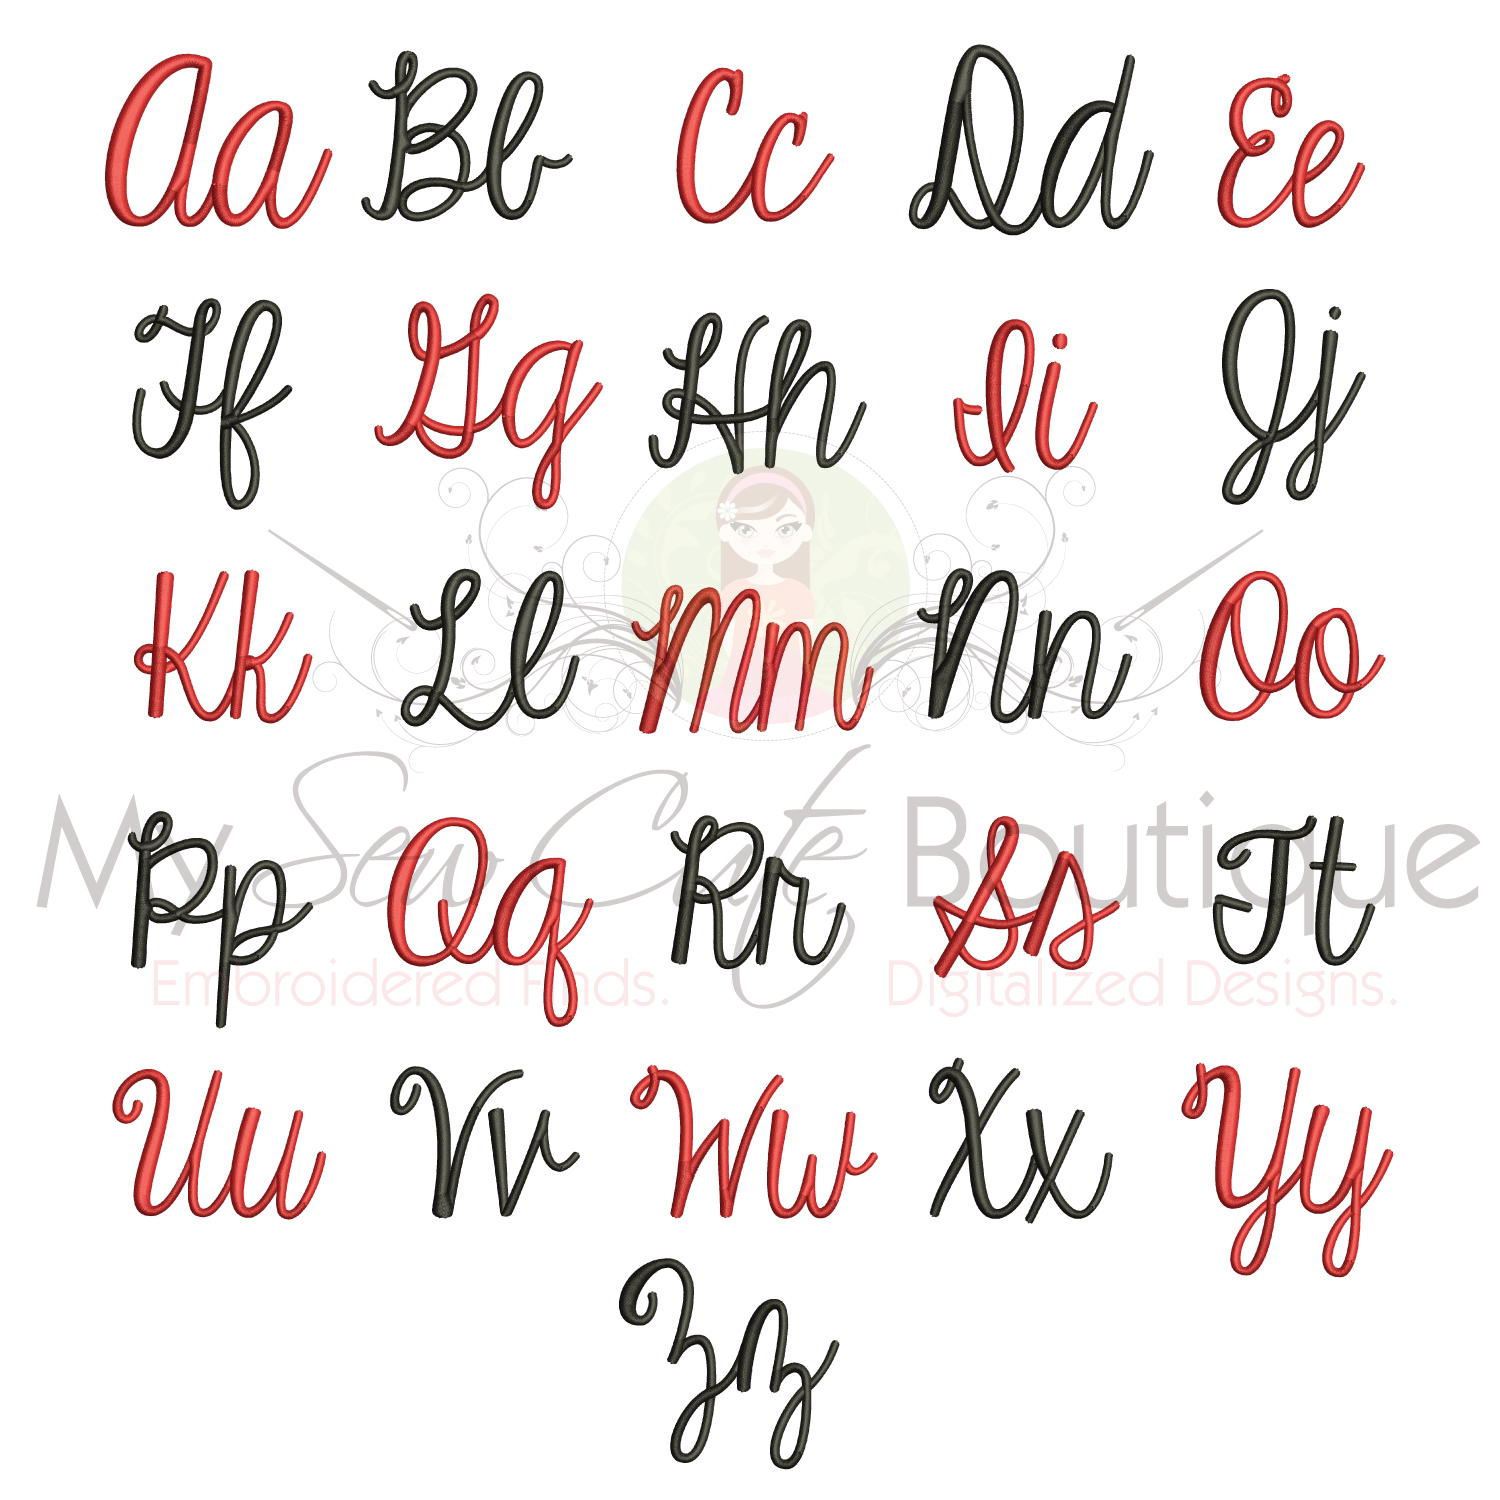 Embroidery Alphabet Patterns Embroidery Fonts Designs For Bx Machine Monogram Pes Files Embrilliance Font Bx Monogram Embroidery Fonts 10 Sizes Instant Download